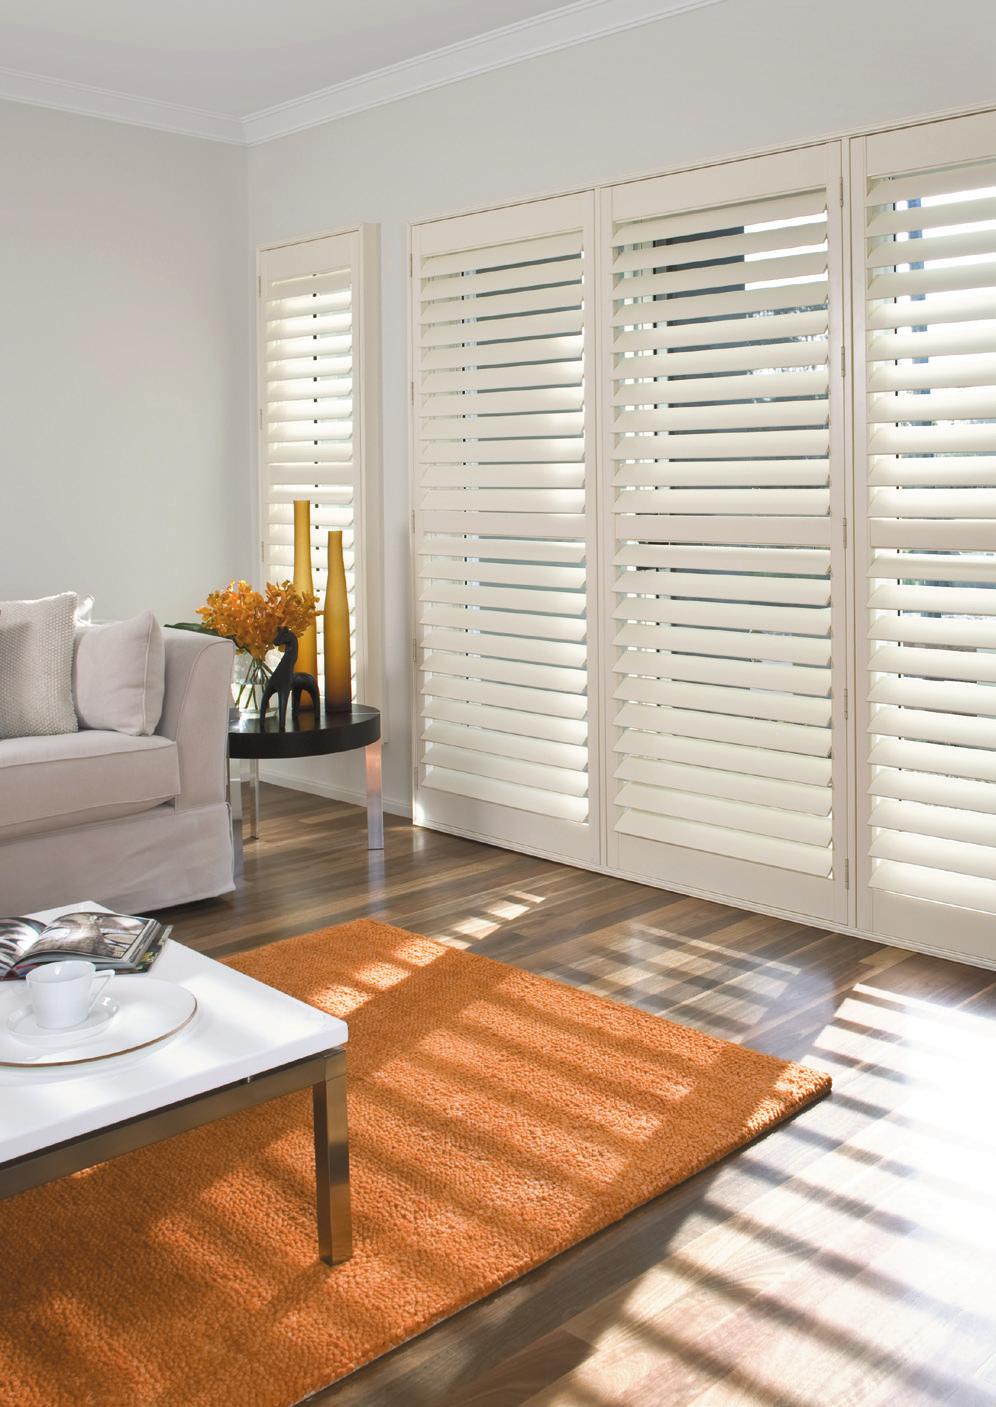 Luxaflex Woods Collection Luxaflex Timber Shutters and Country Woods Venetians are made of quality timber and require minimal regular cleaning.